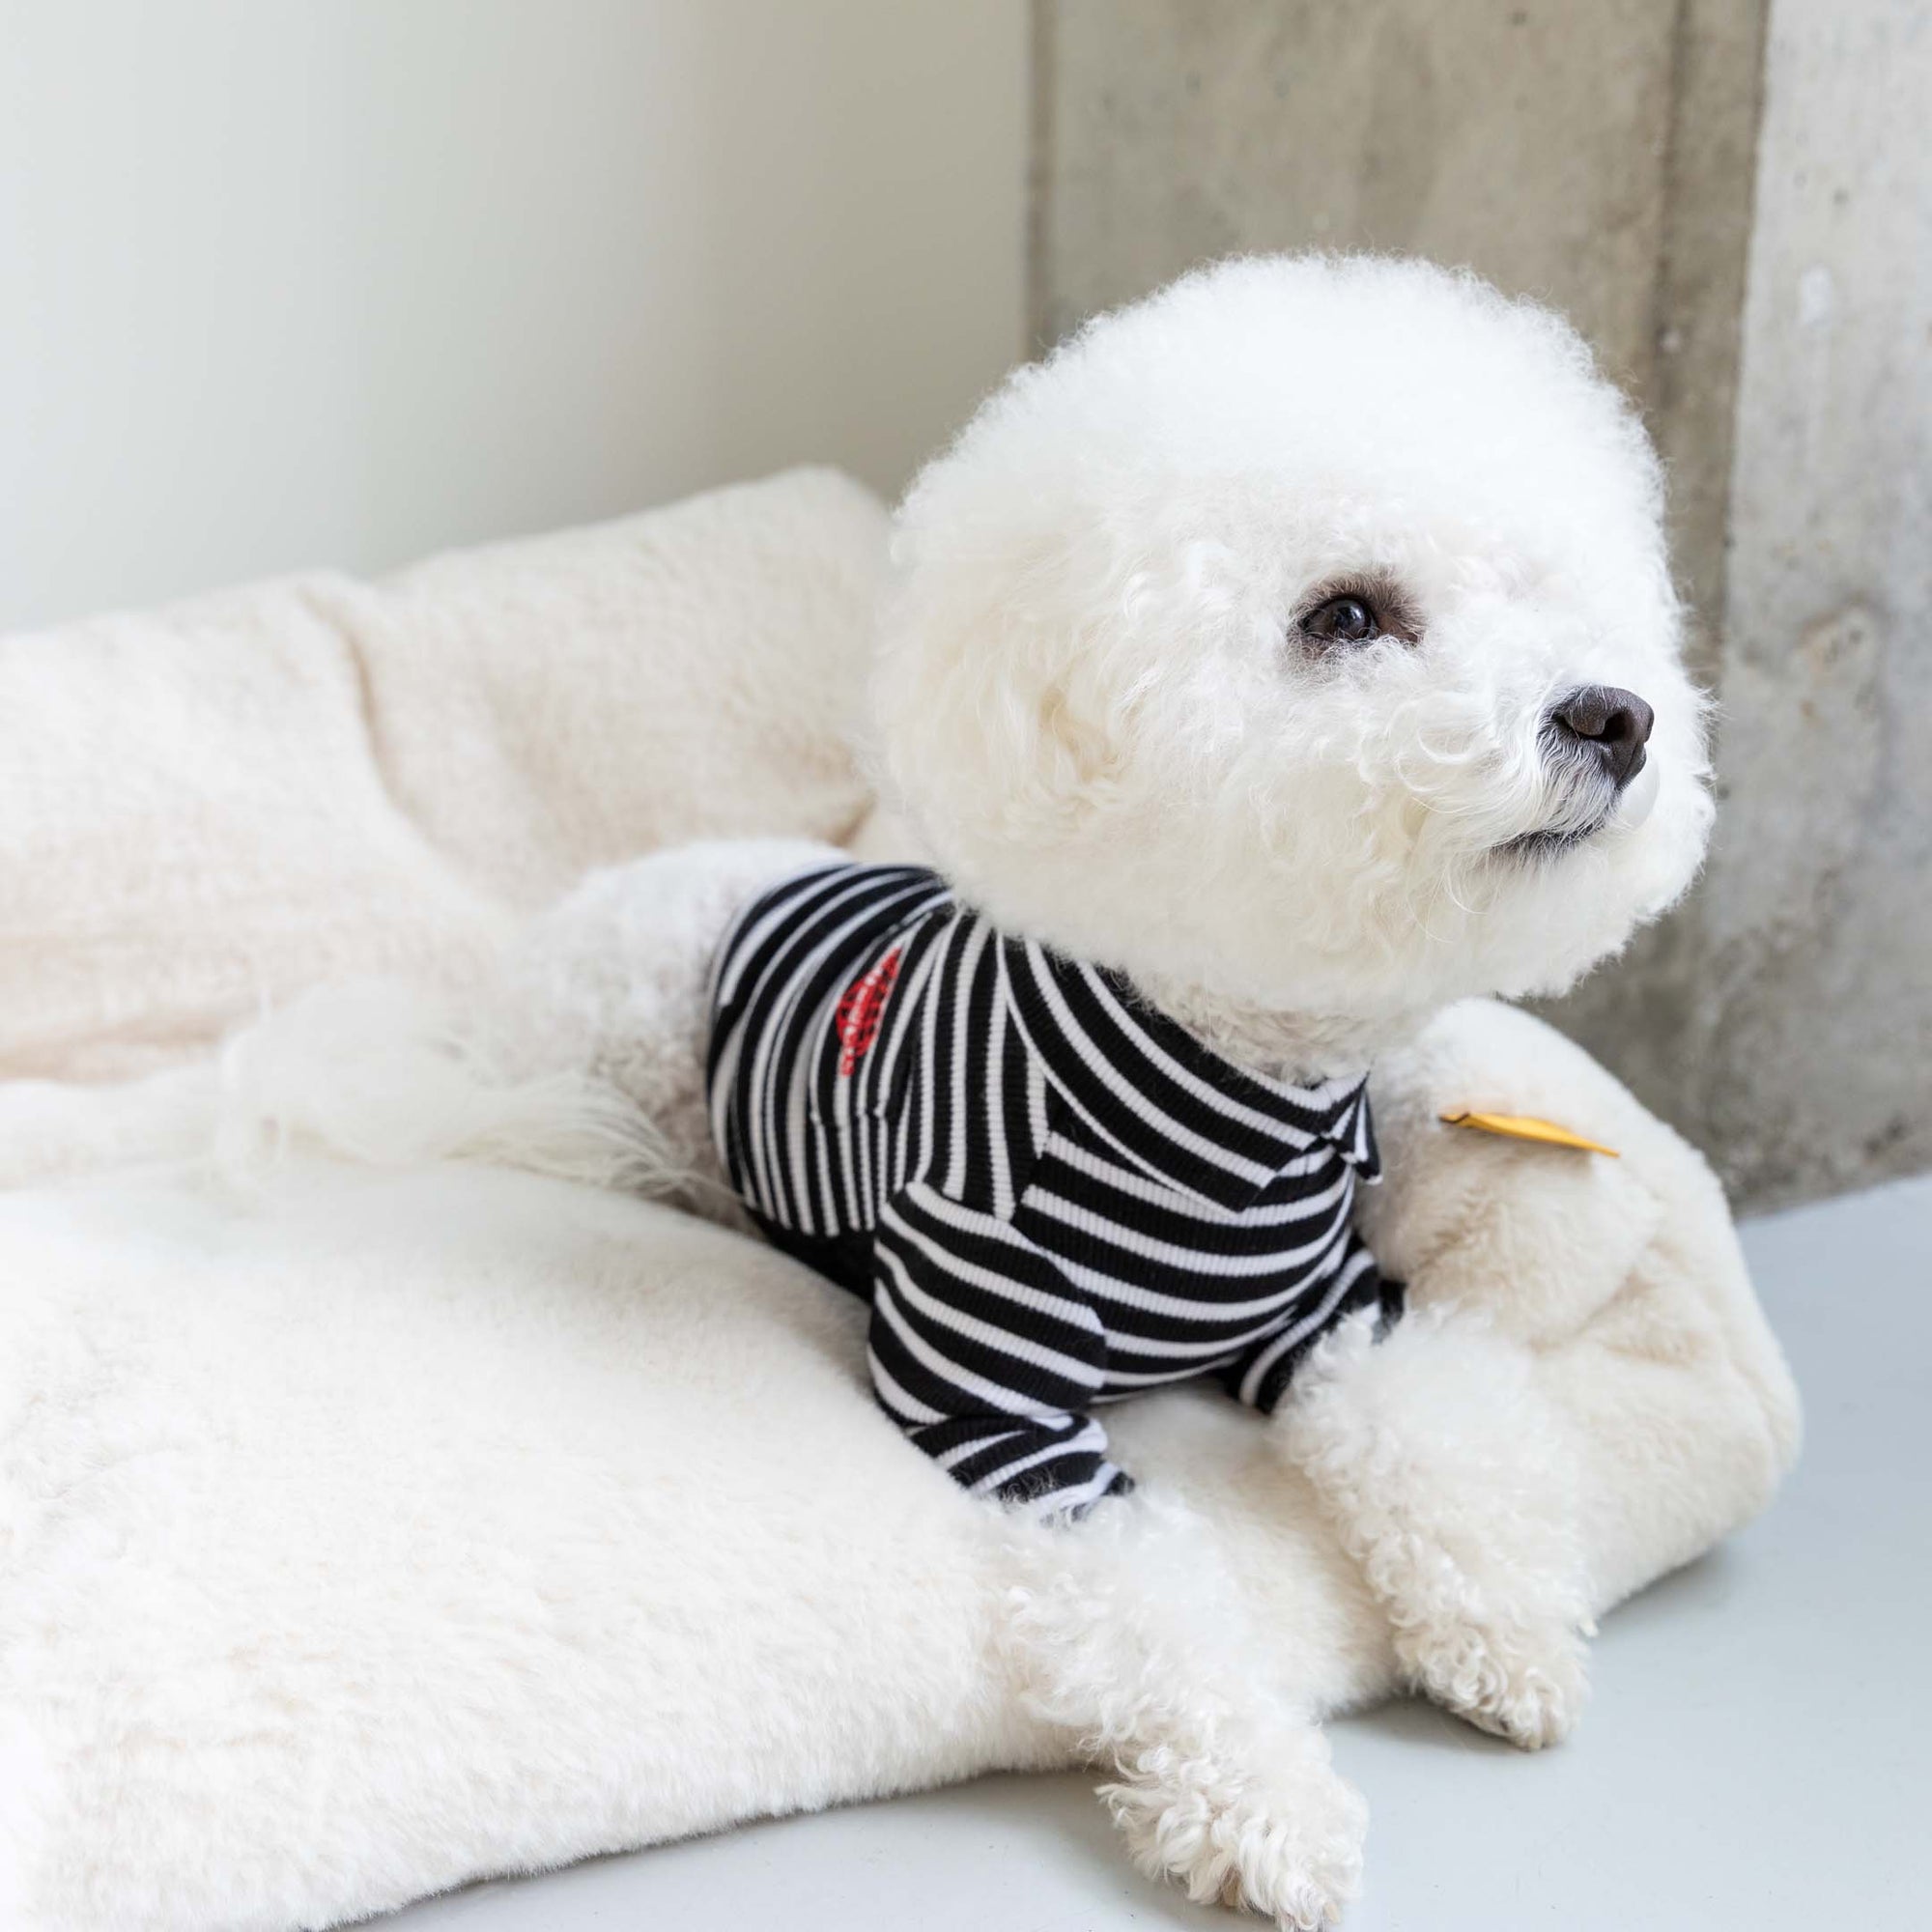 Fluffy white Bichon Frise lounging in a cozy black and white striped dog shirt with heart detail, radiating elegance.